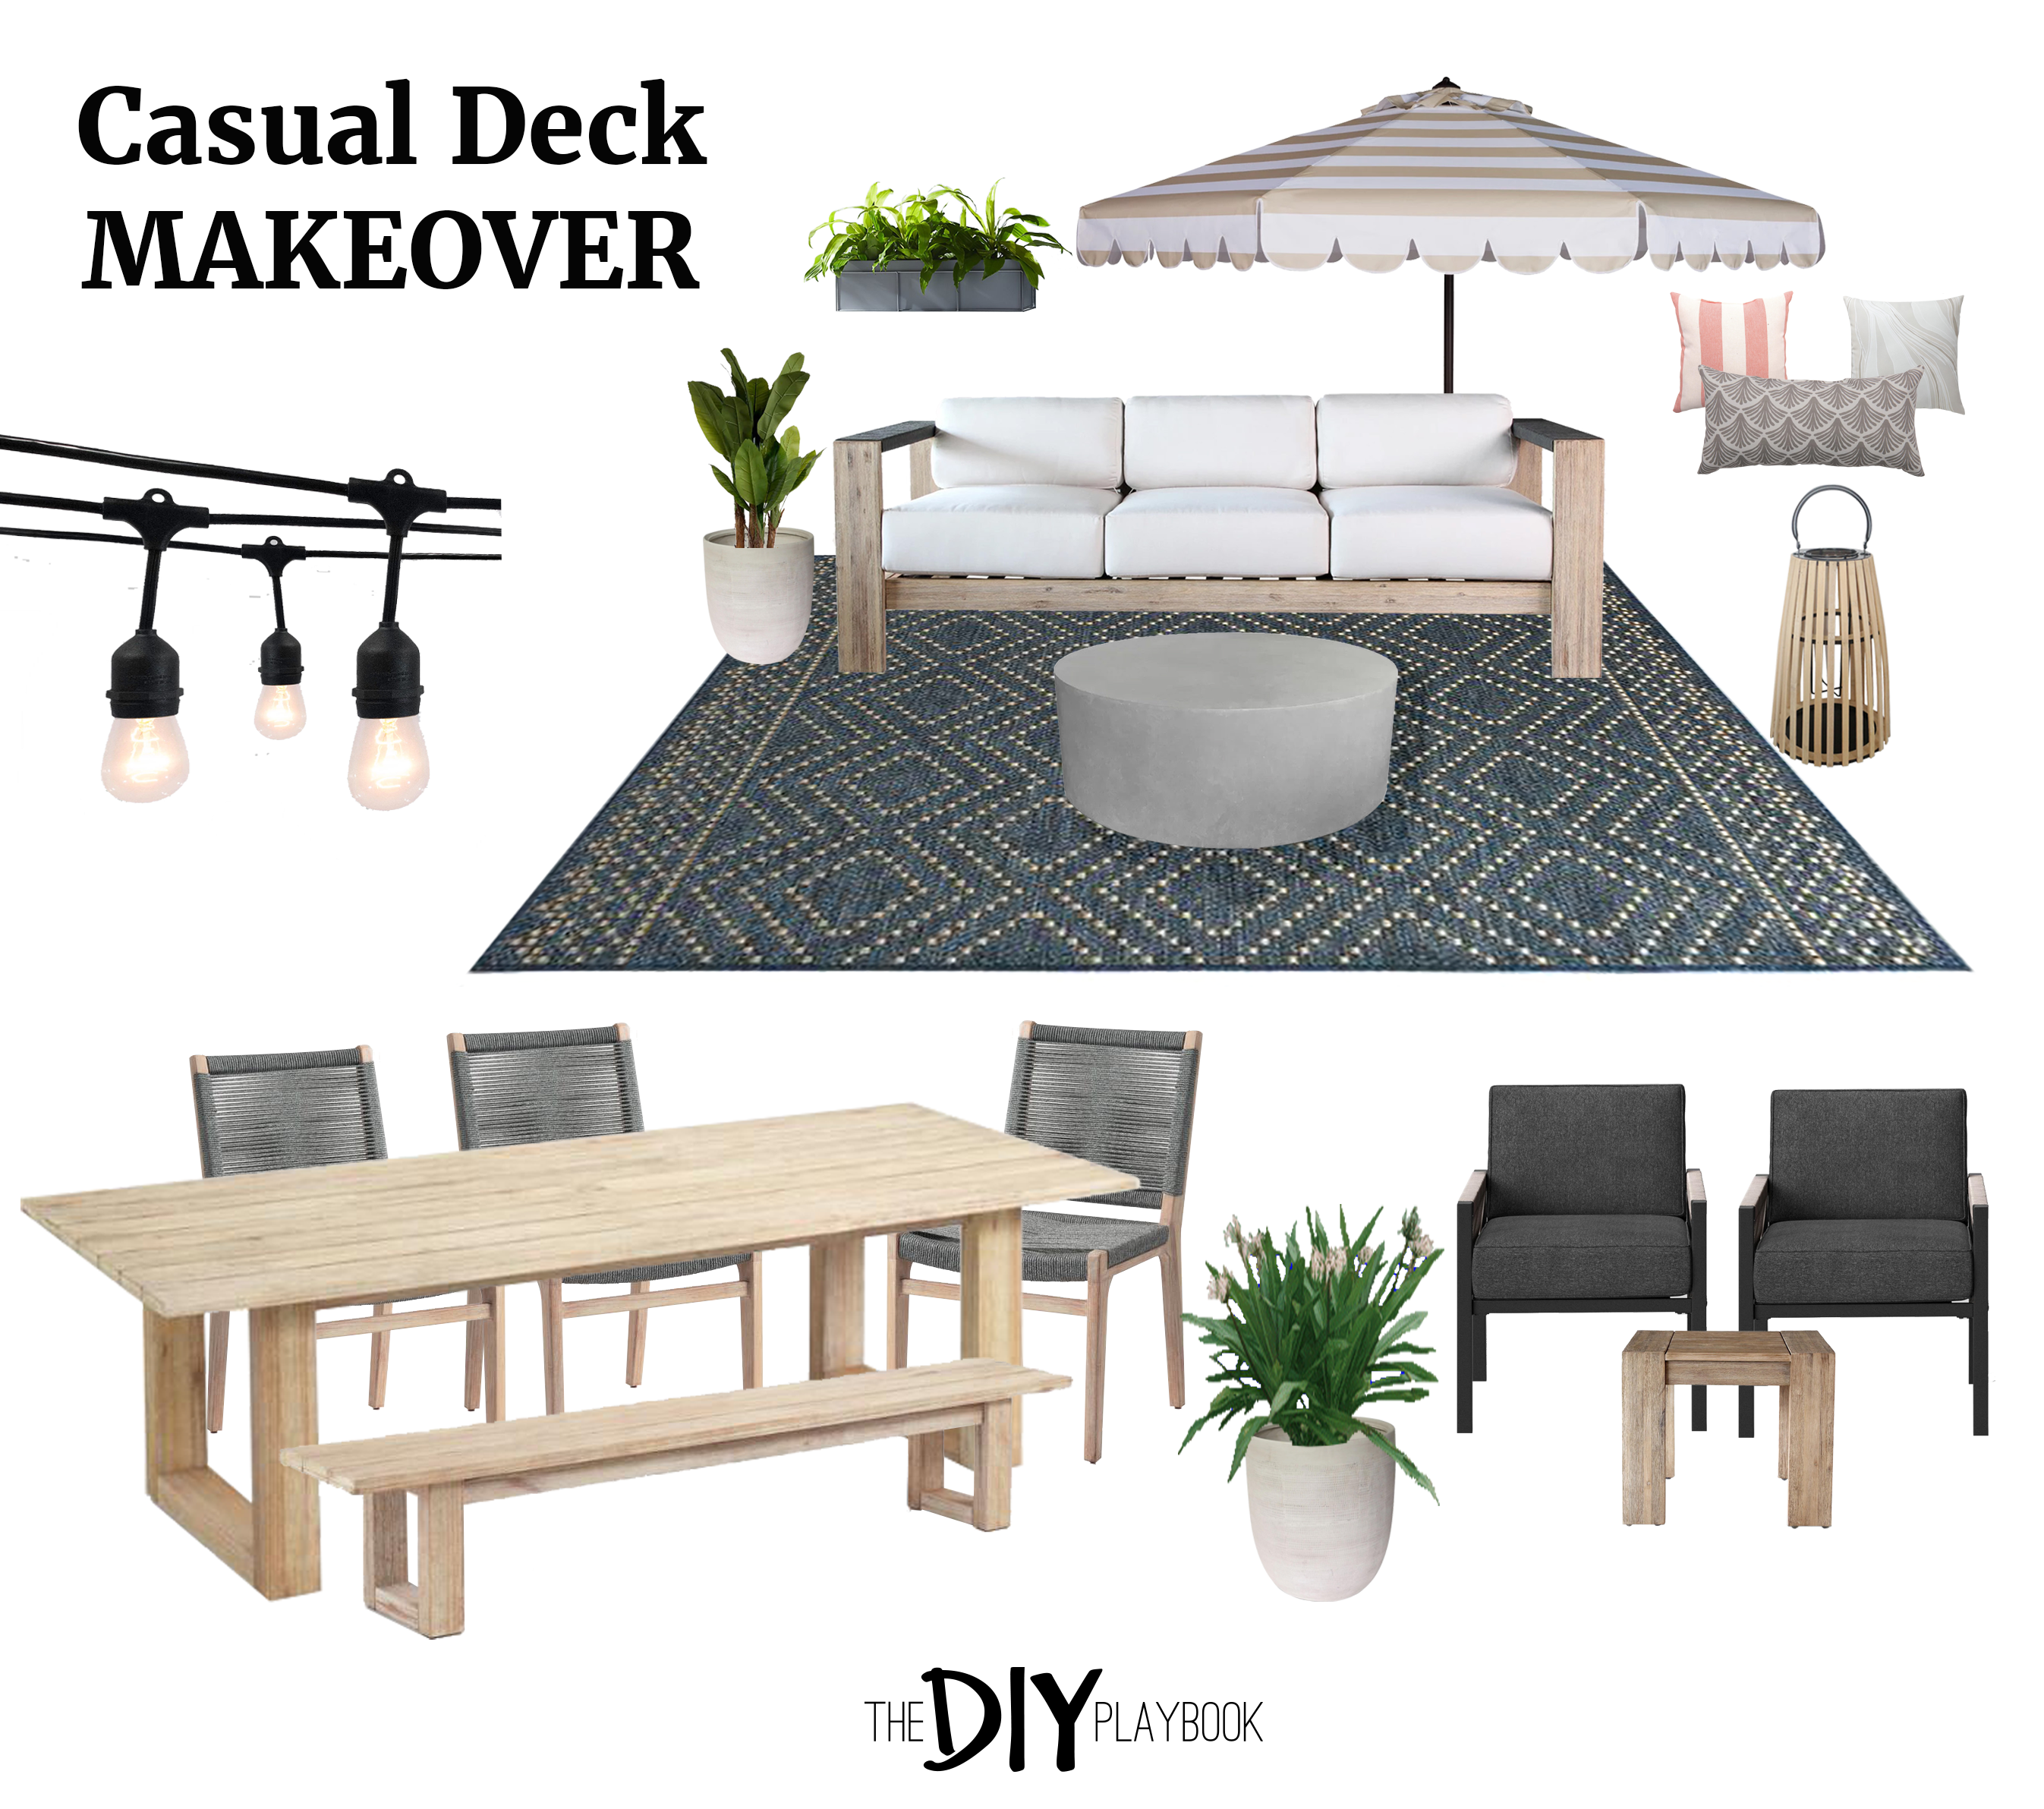 Patio Furniture Layout for a Large Deck | The DIY Playbook